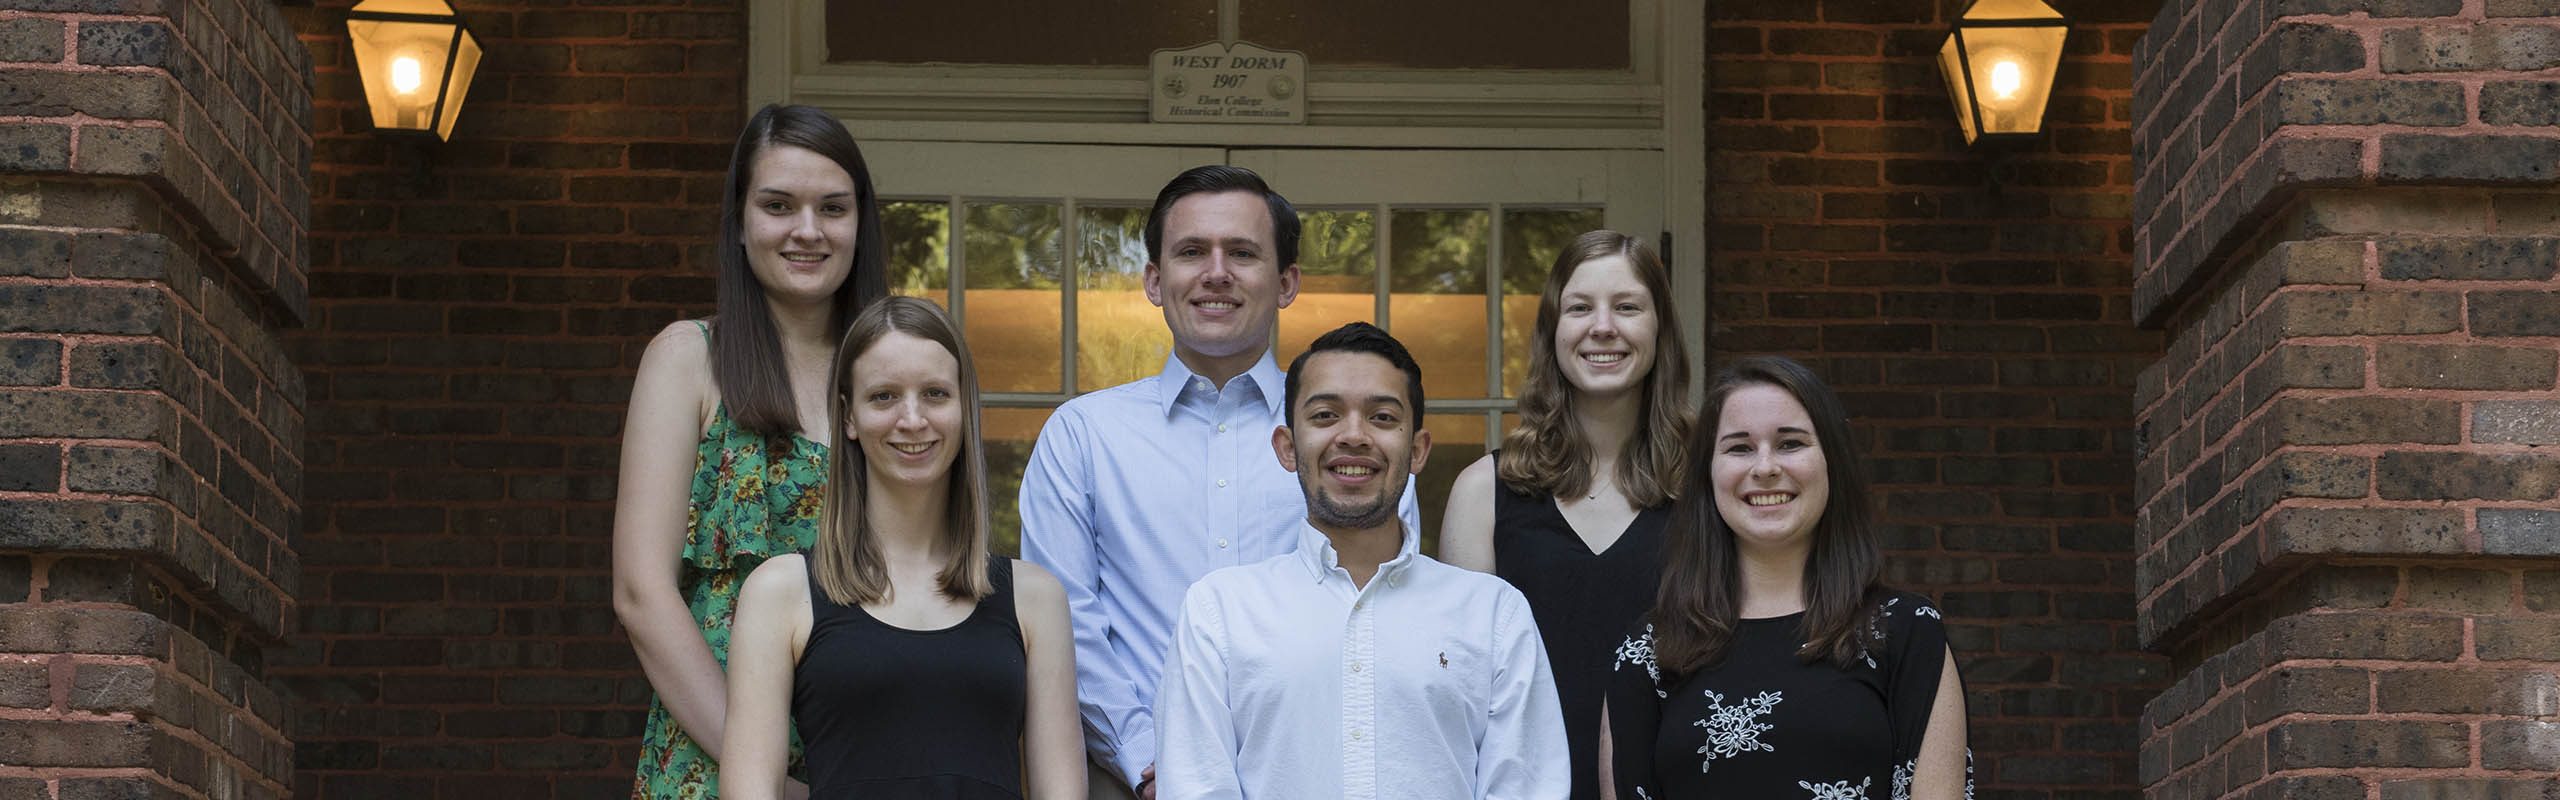 Six members of the Class of 2017 were offered Fulbright English Teaching Assistantship or Fulbright Study/Research grants. They are, left to right, Elizabeth Meynardie, Lauren Salig, Jack Doyle, Steven Armendariz, Jacqueline Spencer and Kelly Richard.